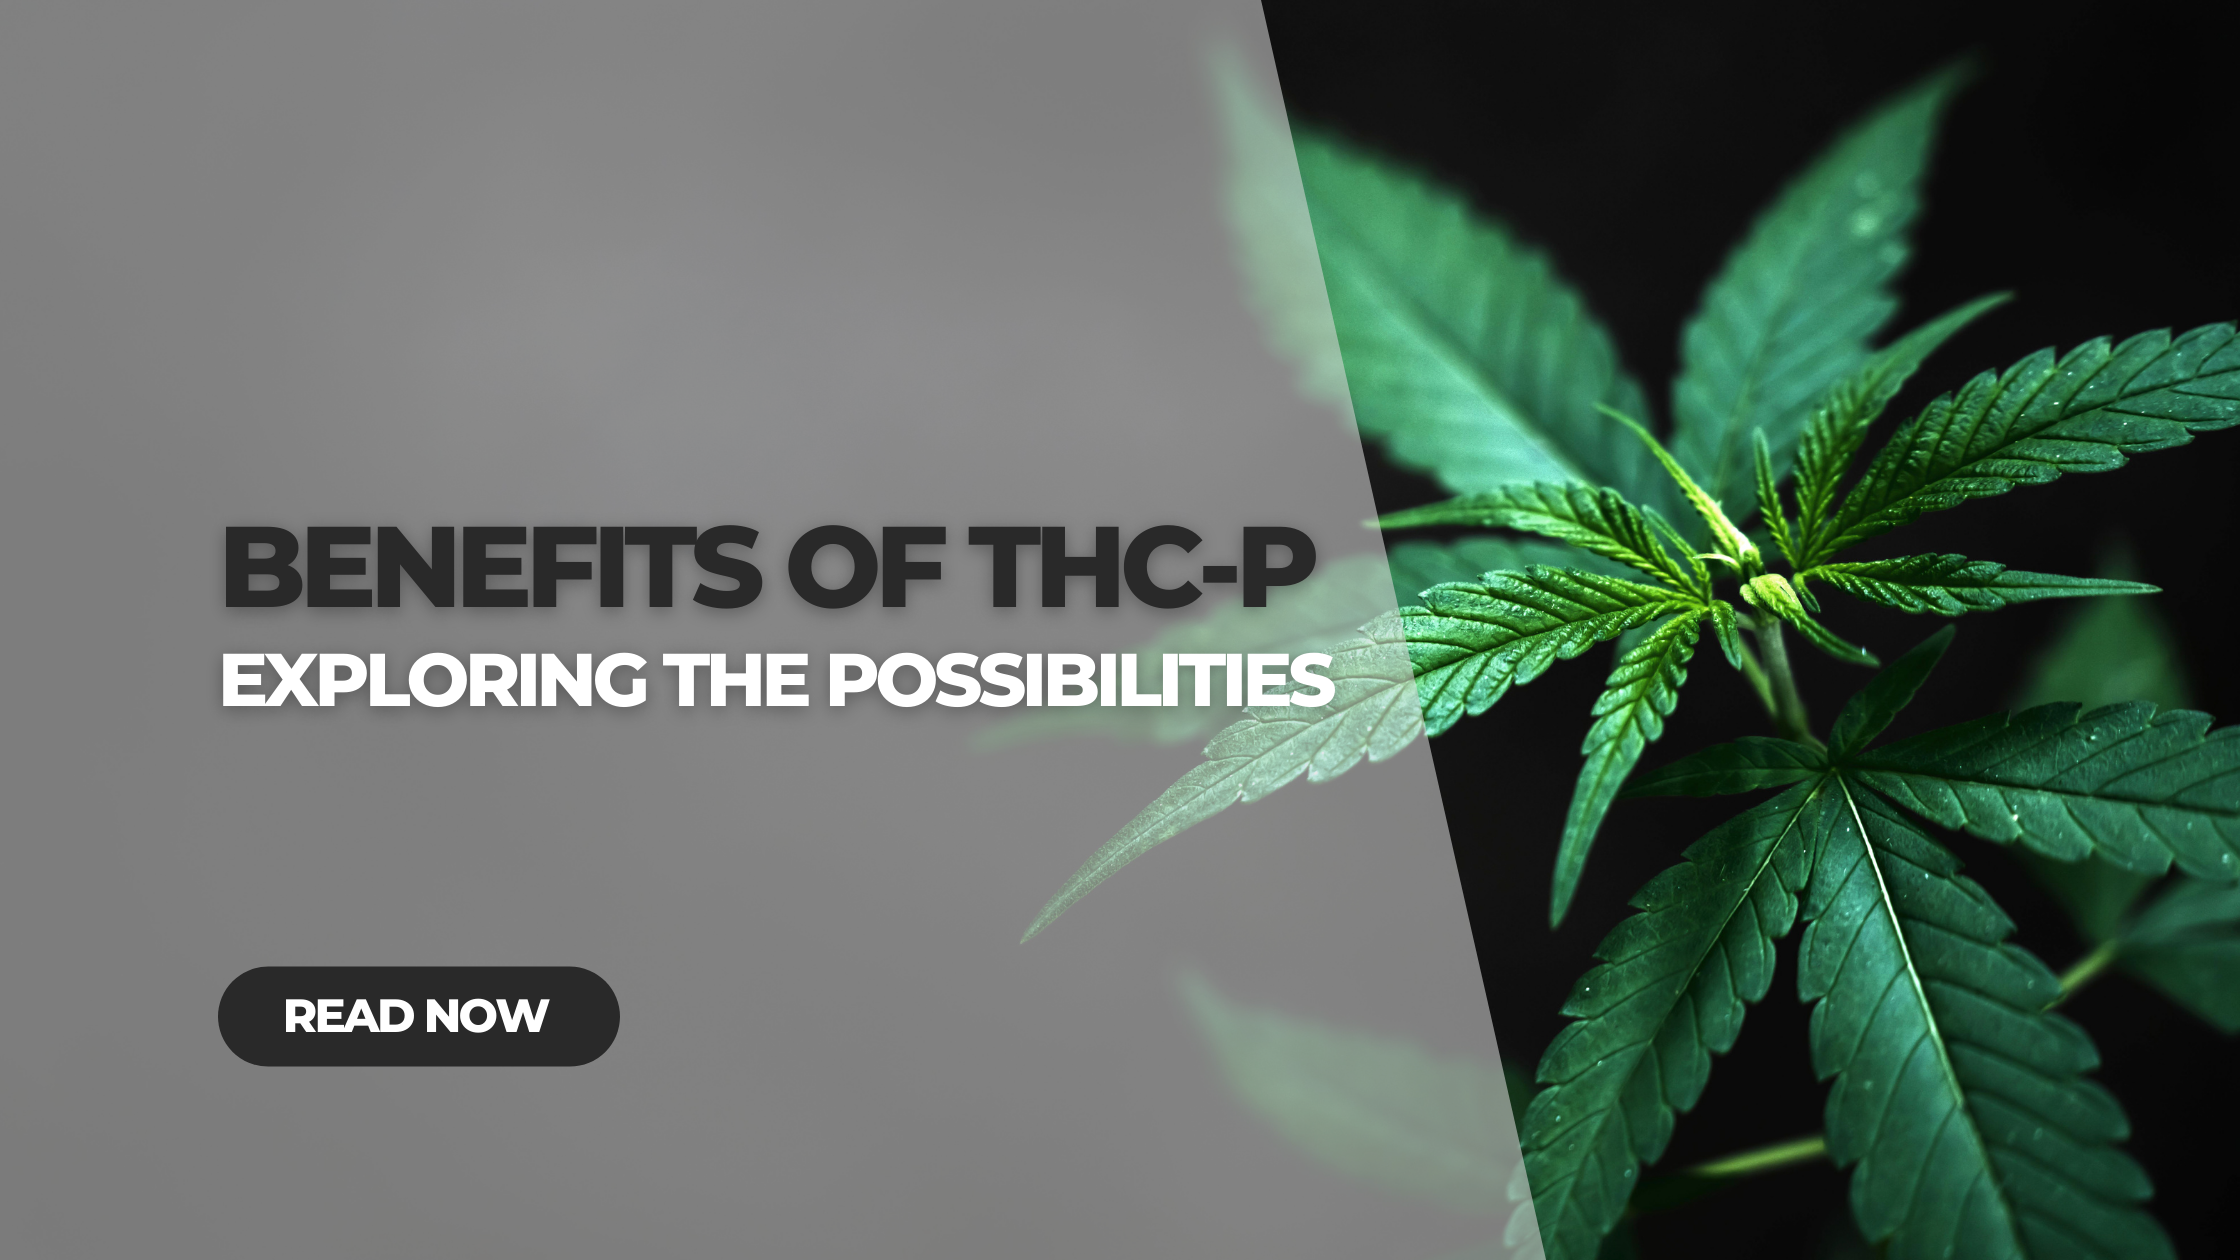 What is THCP? Is it really 33 times stronger than THC?